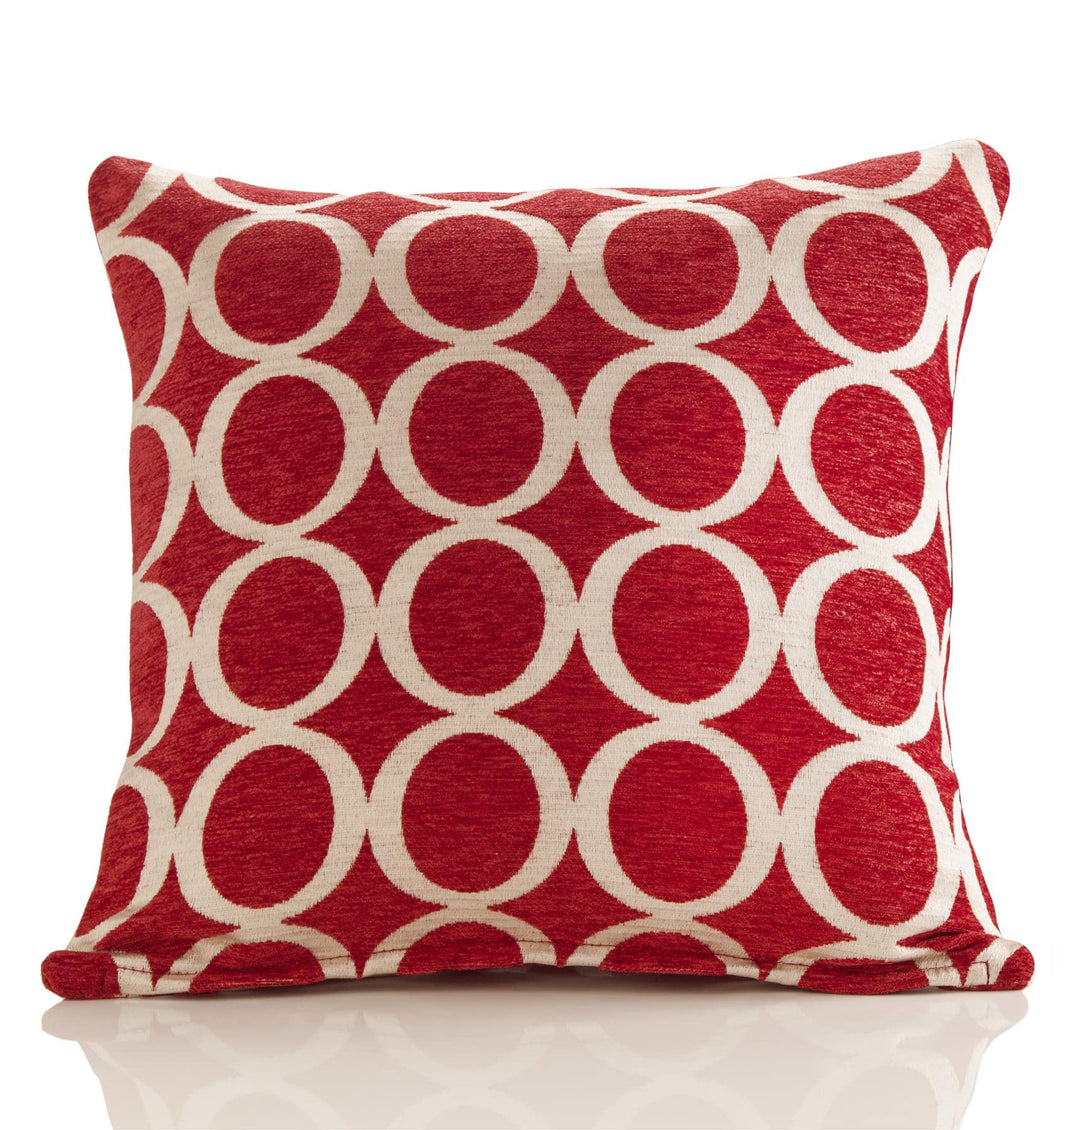 Oh 18"  [Cushion Cover] - TidySpaces